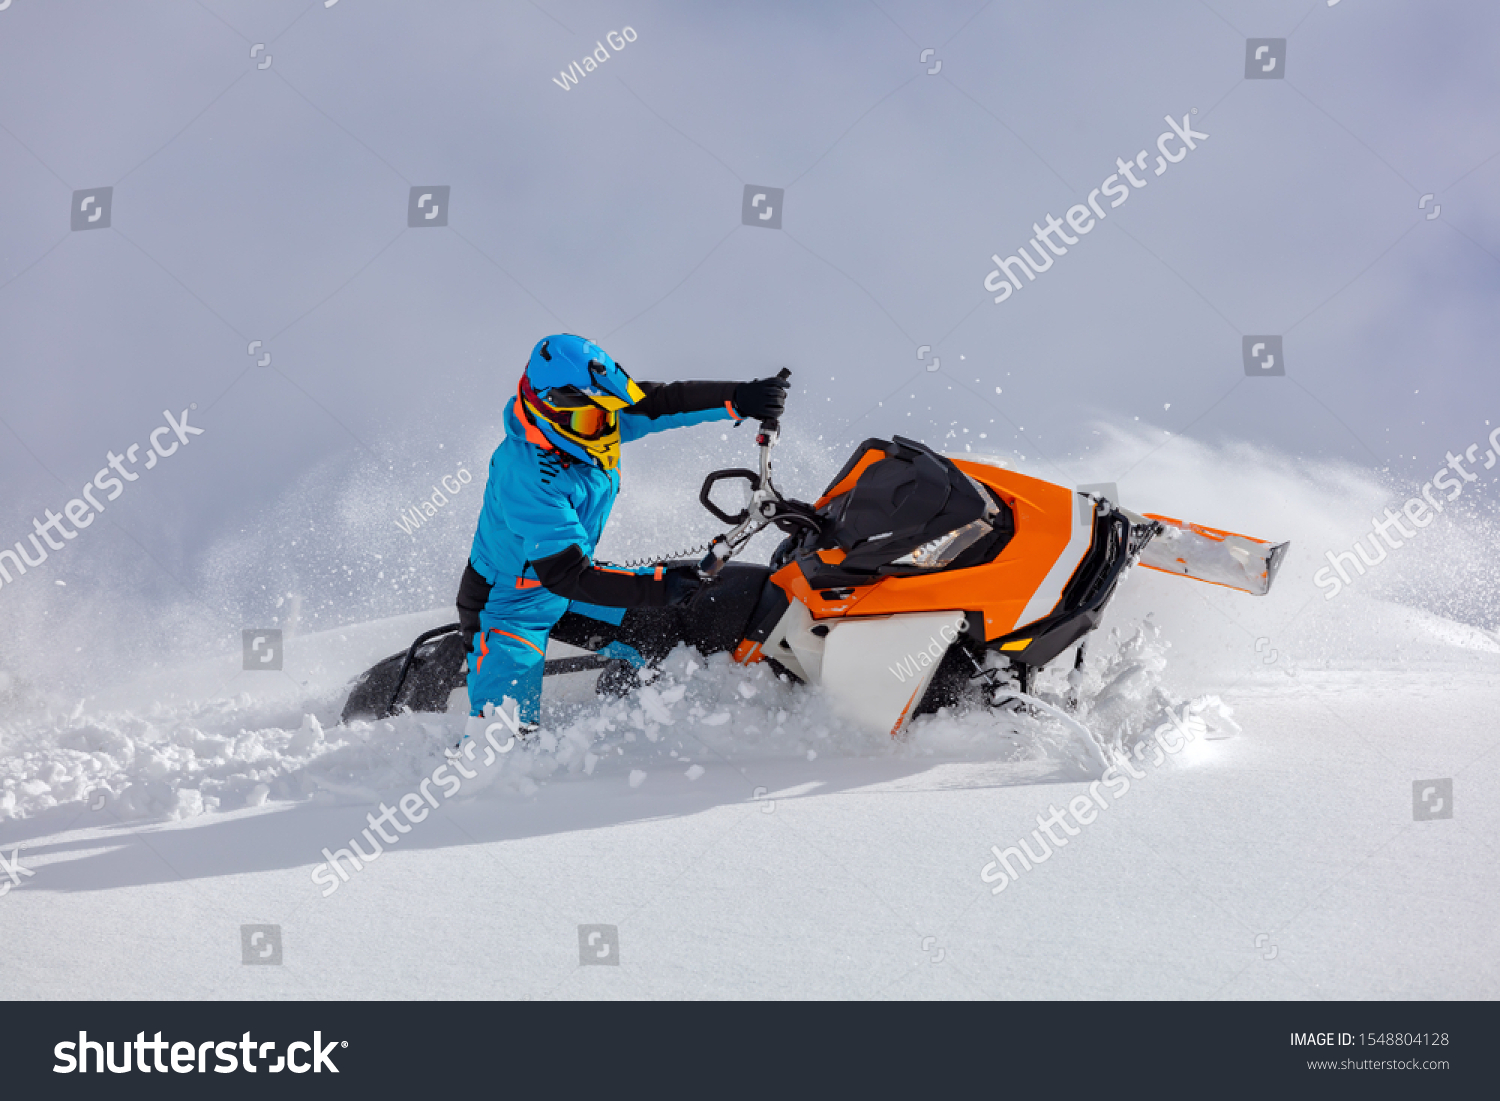 the guy turns a snowmobile in a mountain valley on the background of the clear snow and sky, leaving behind a trail of splashes. bright snow bike and suit without brands. Boondocker sports snowmobile #1548804128